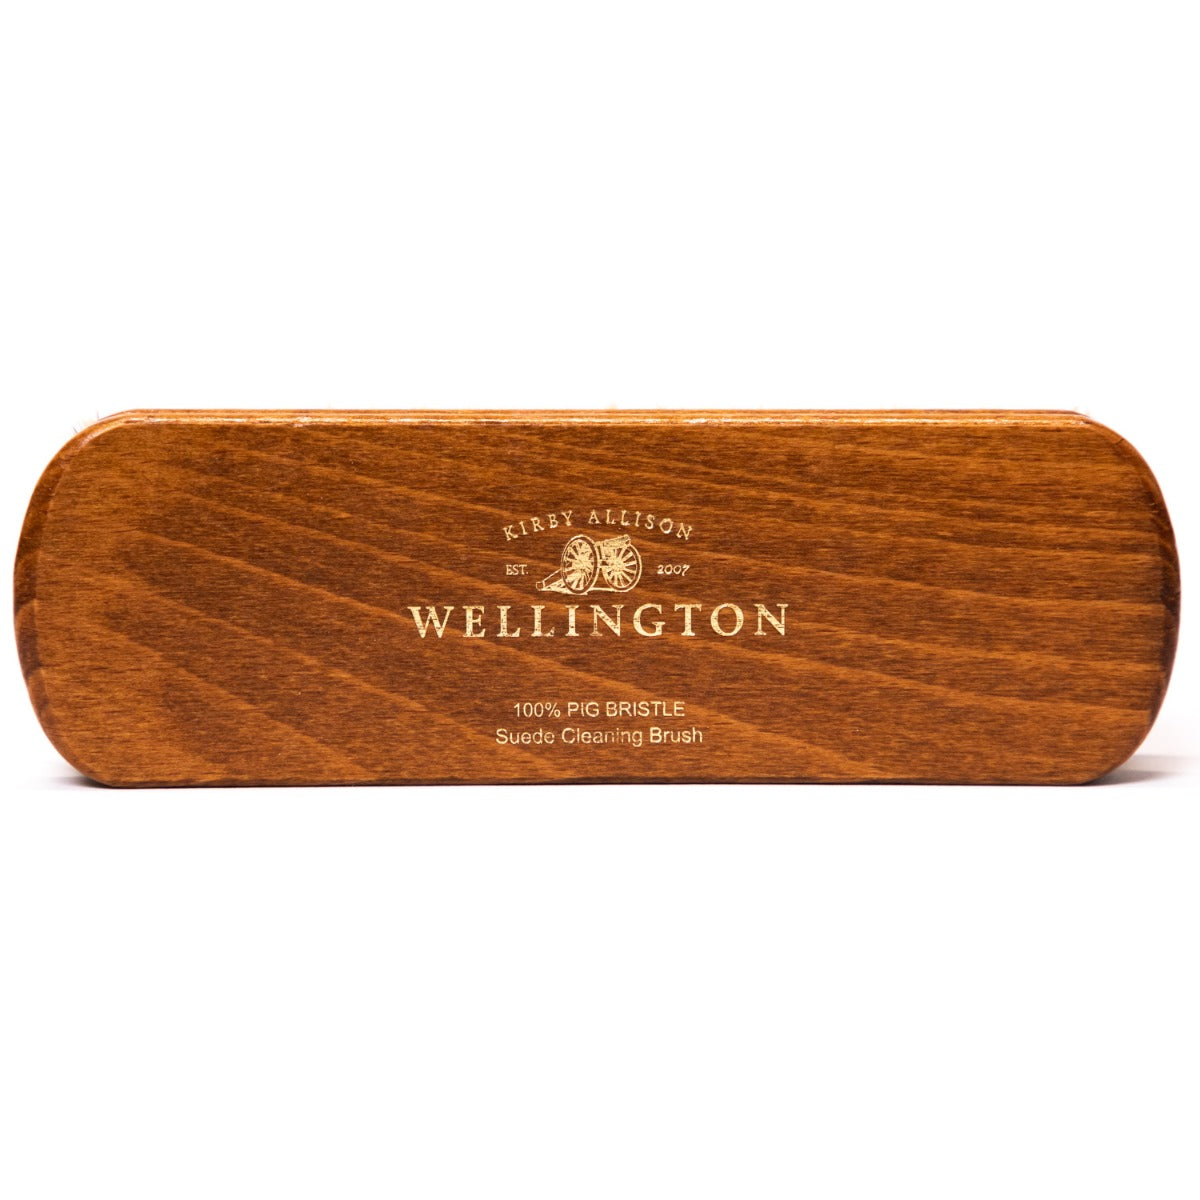 A wooden box with the word wellington on it, containing a Wellington Deluxe Pig Bristle Suede Cleaning Brush from KirbyAllison.com.